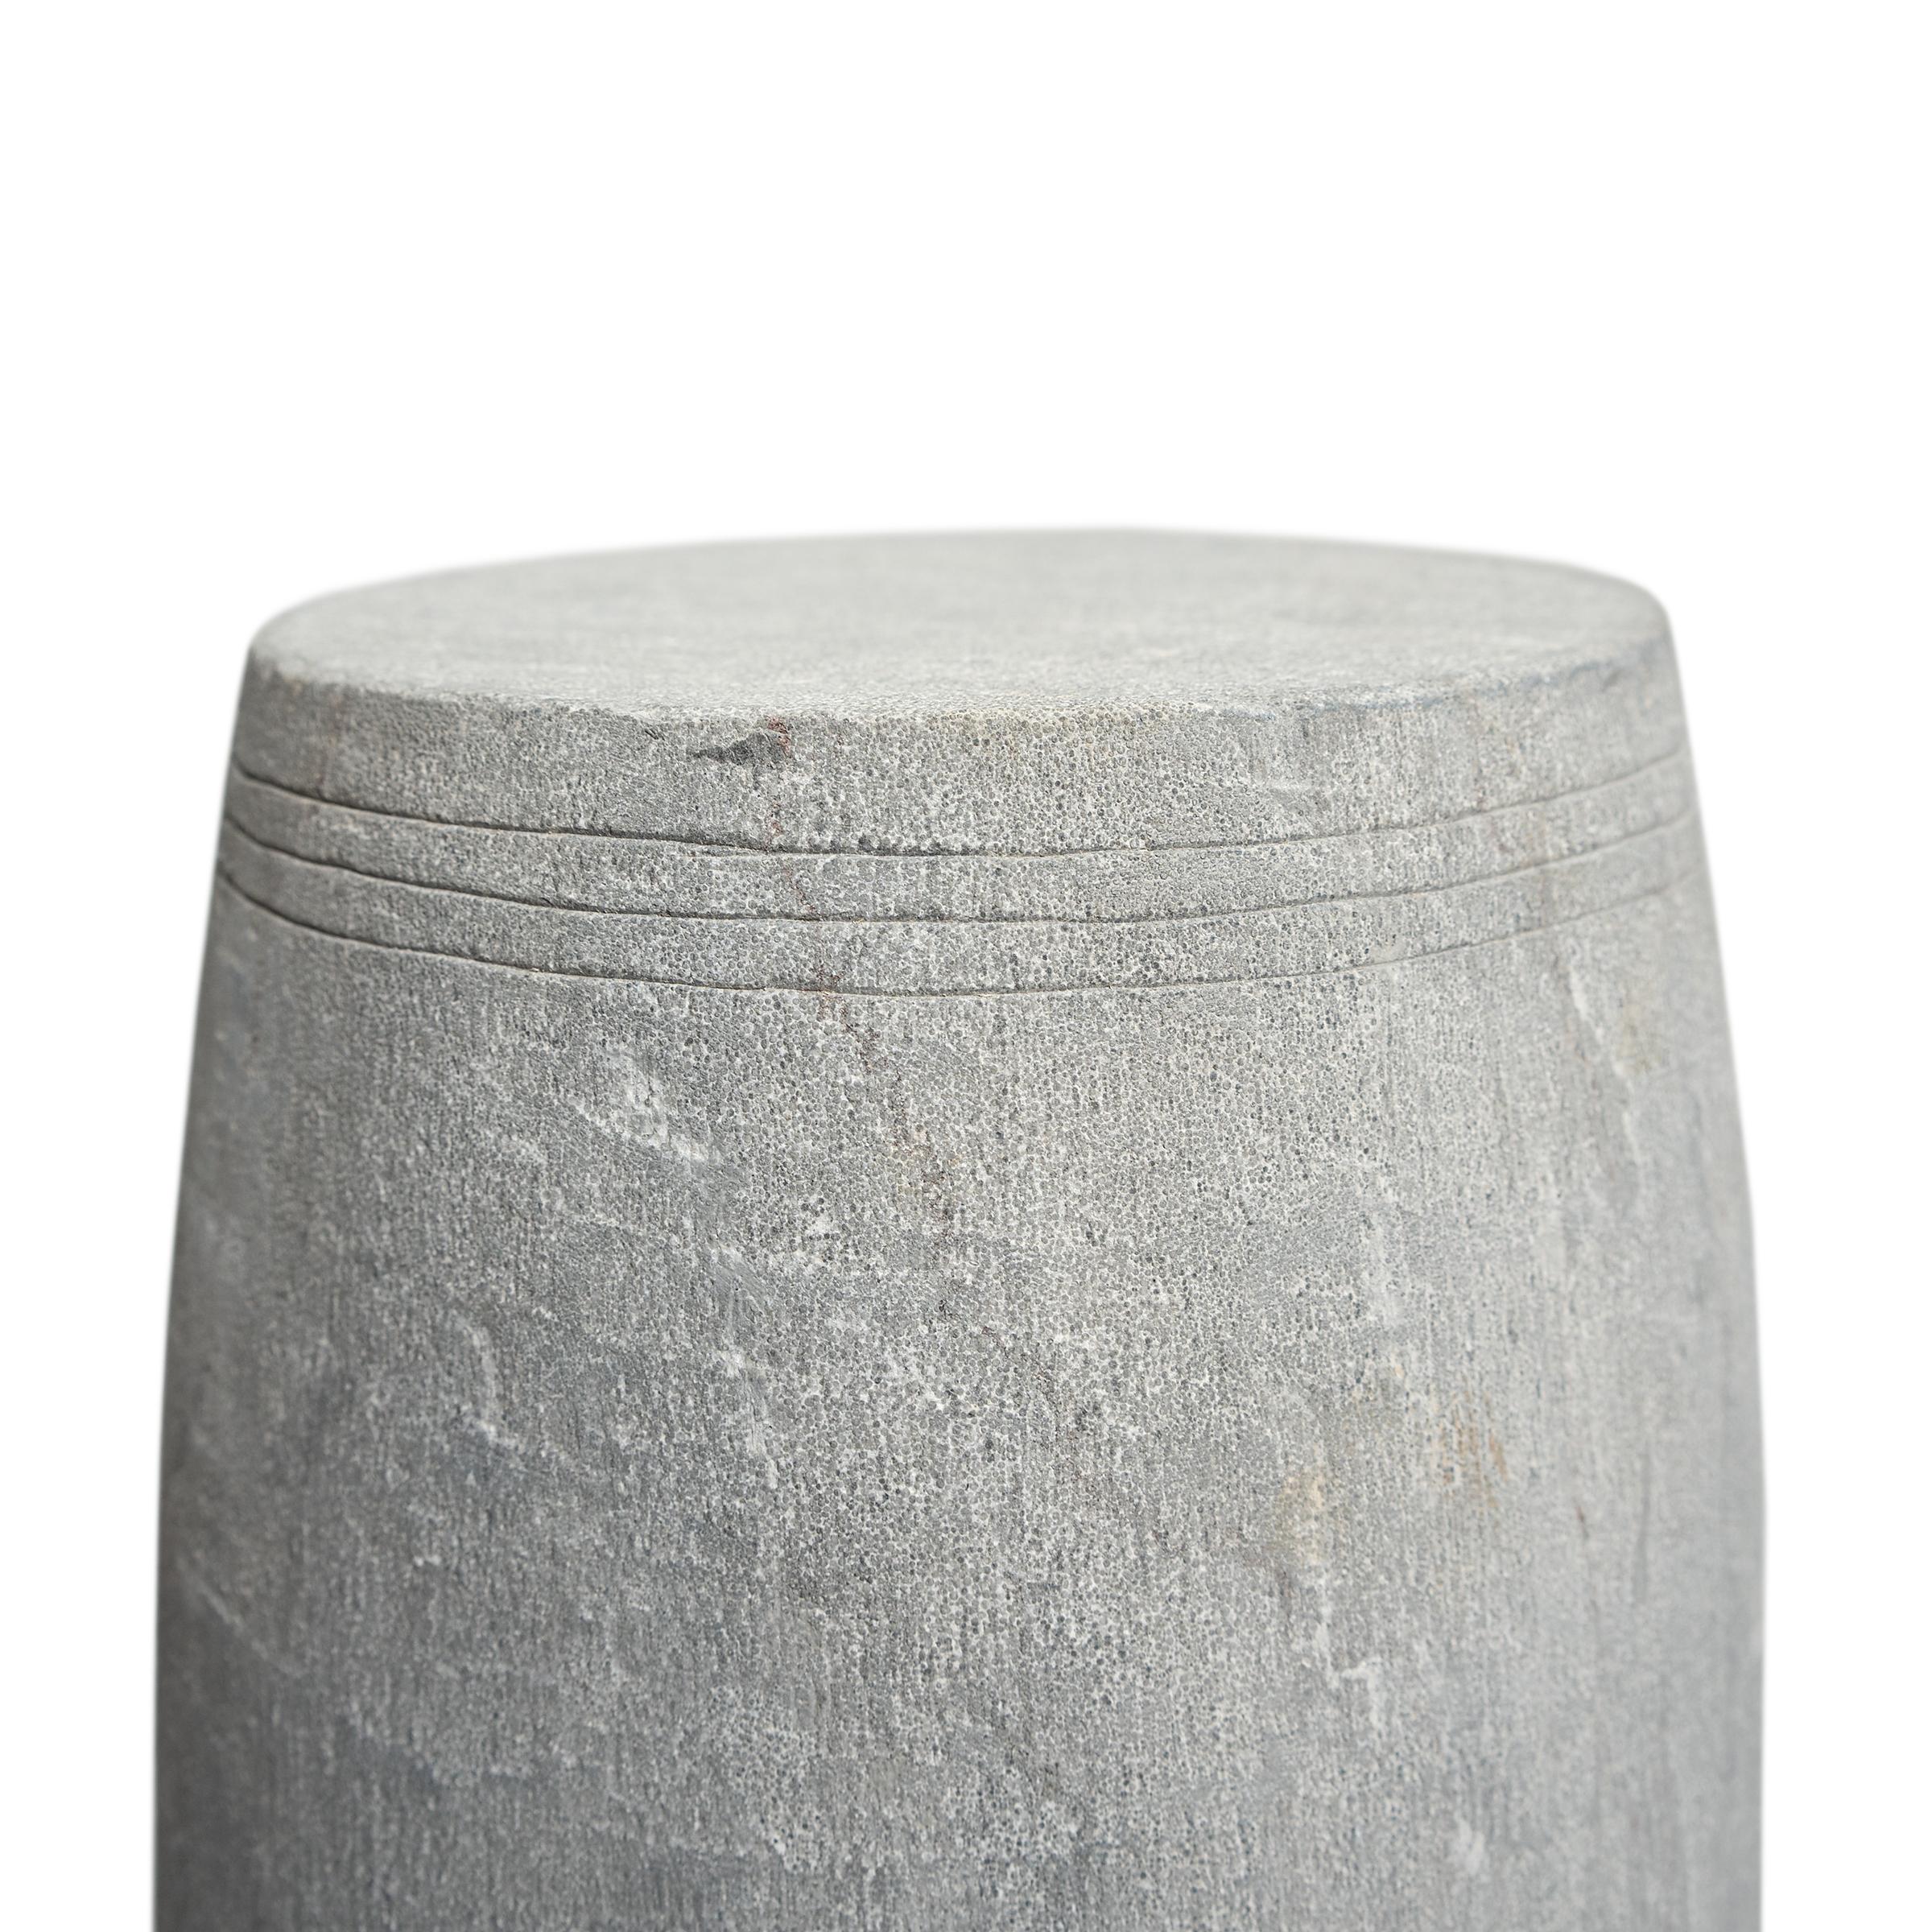 Carved Chinese Limestone Drum